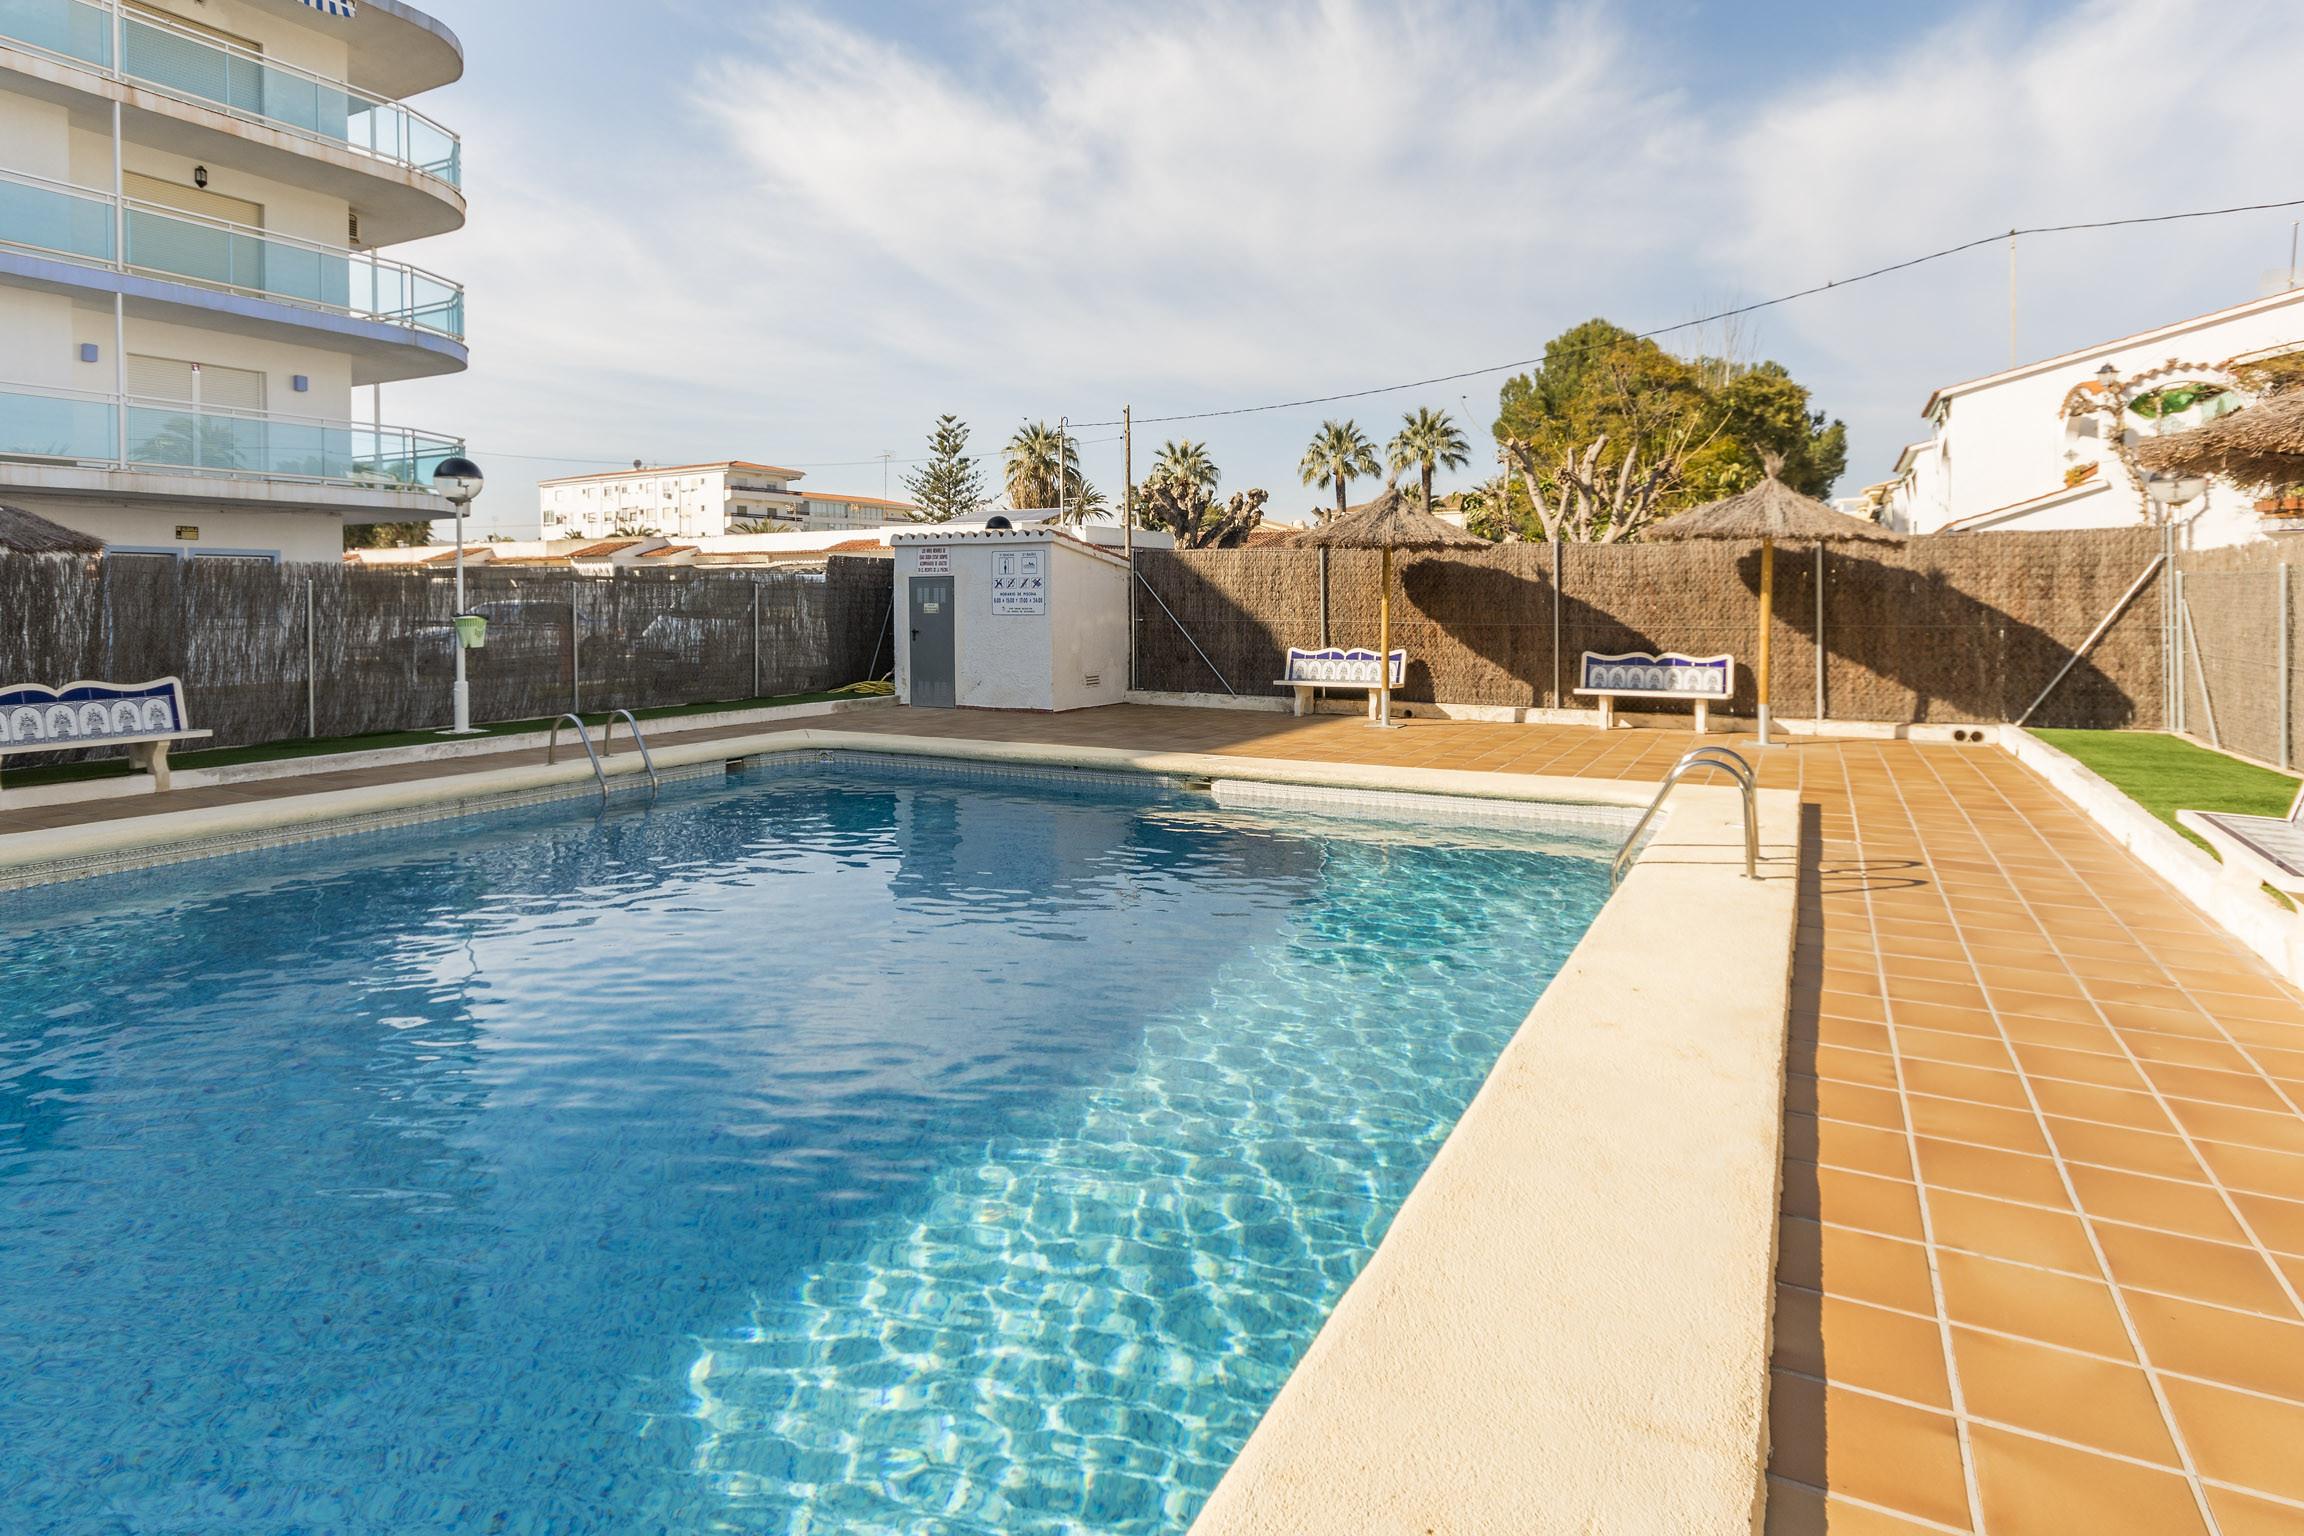 Property Image 1 - EGEU - Bright apartment with shared pool and free WiFi.